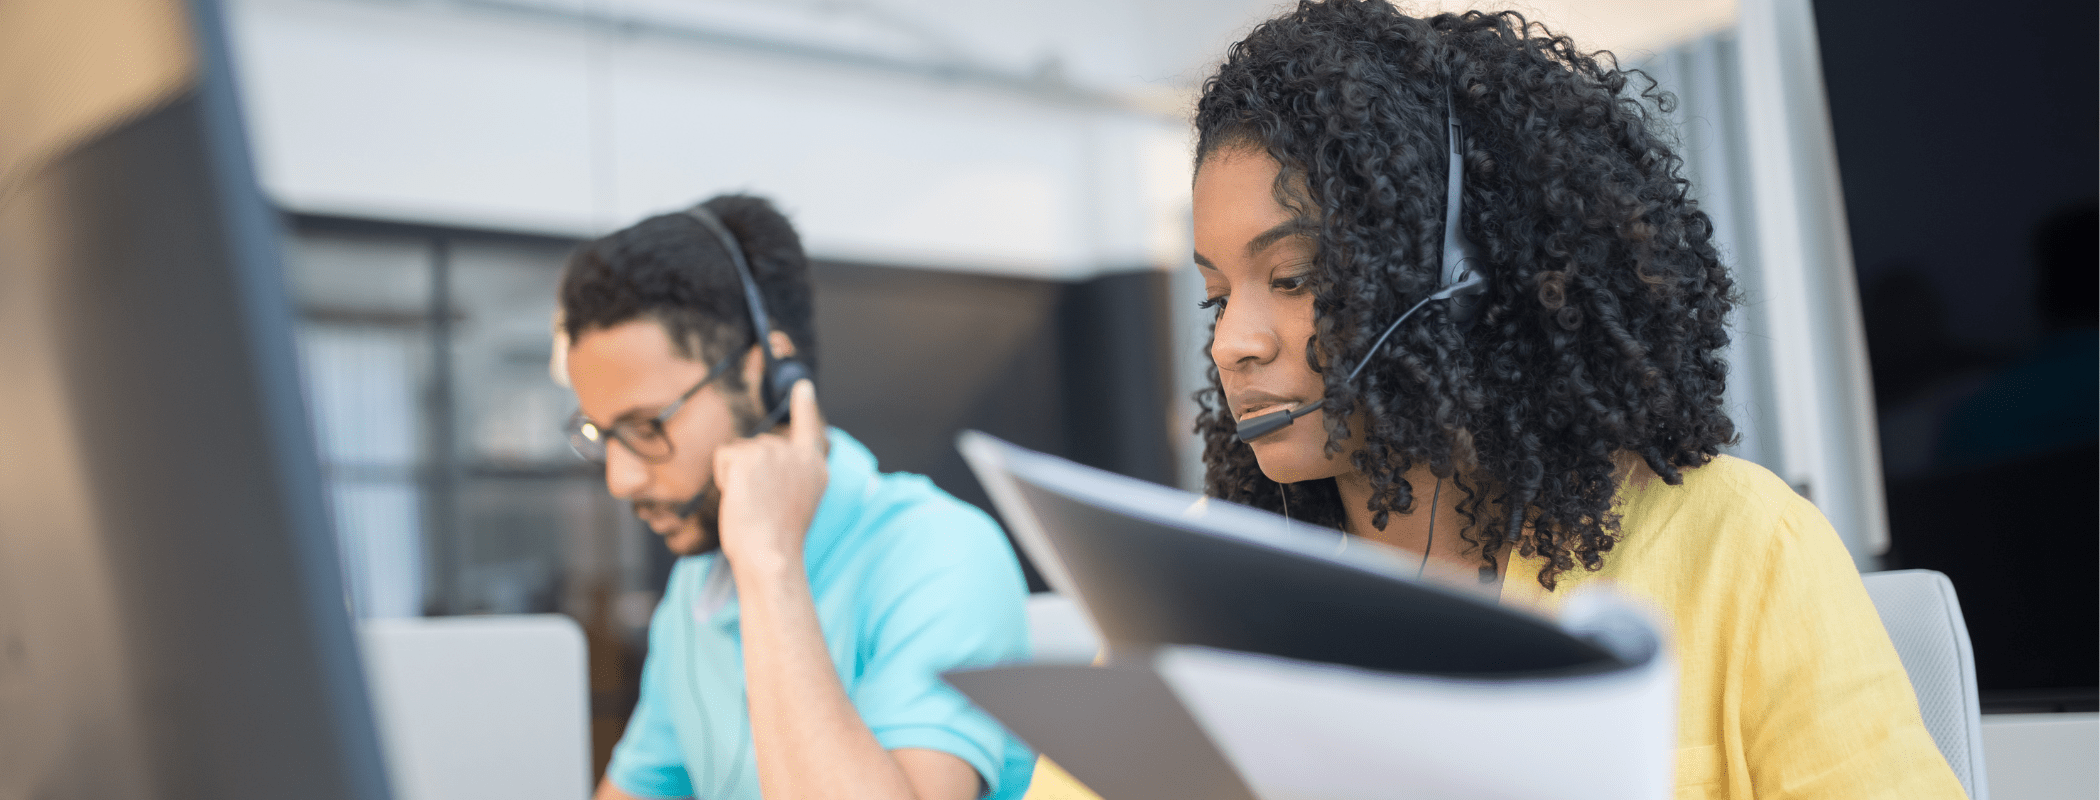 Two Call Center Employees